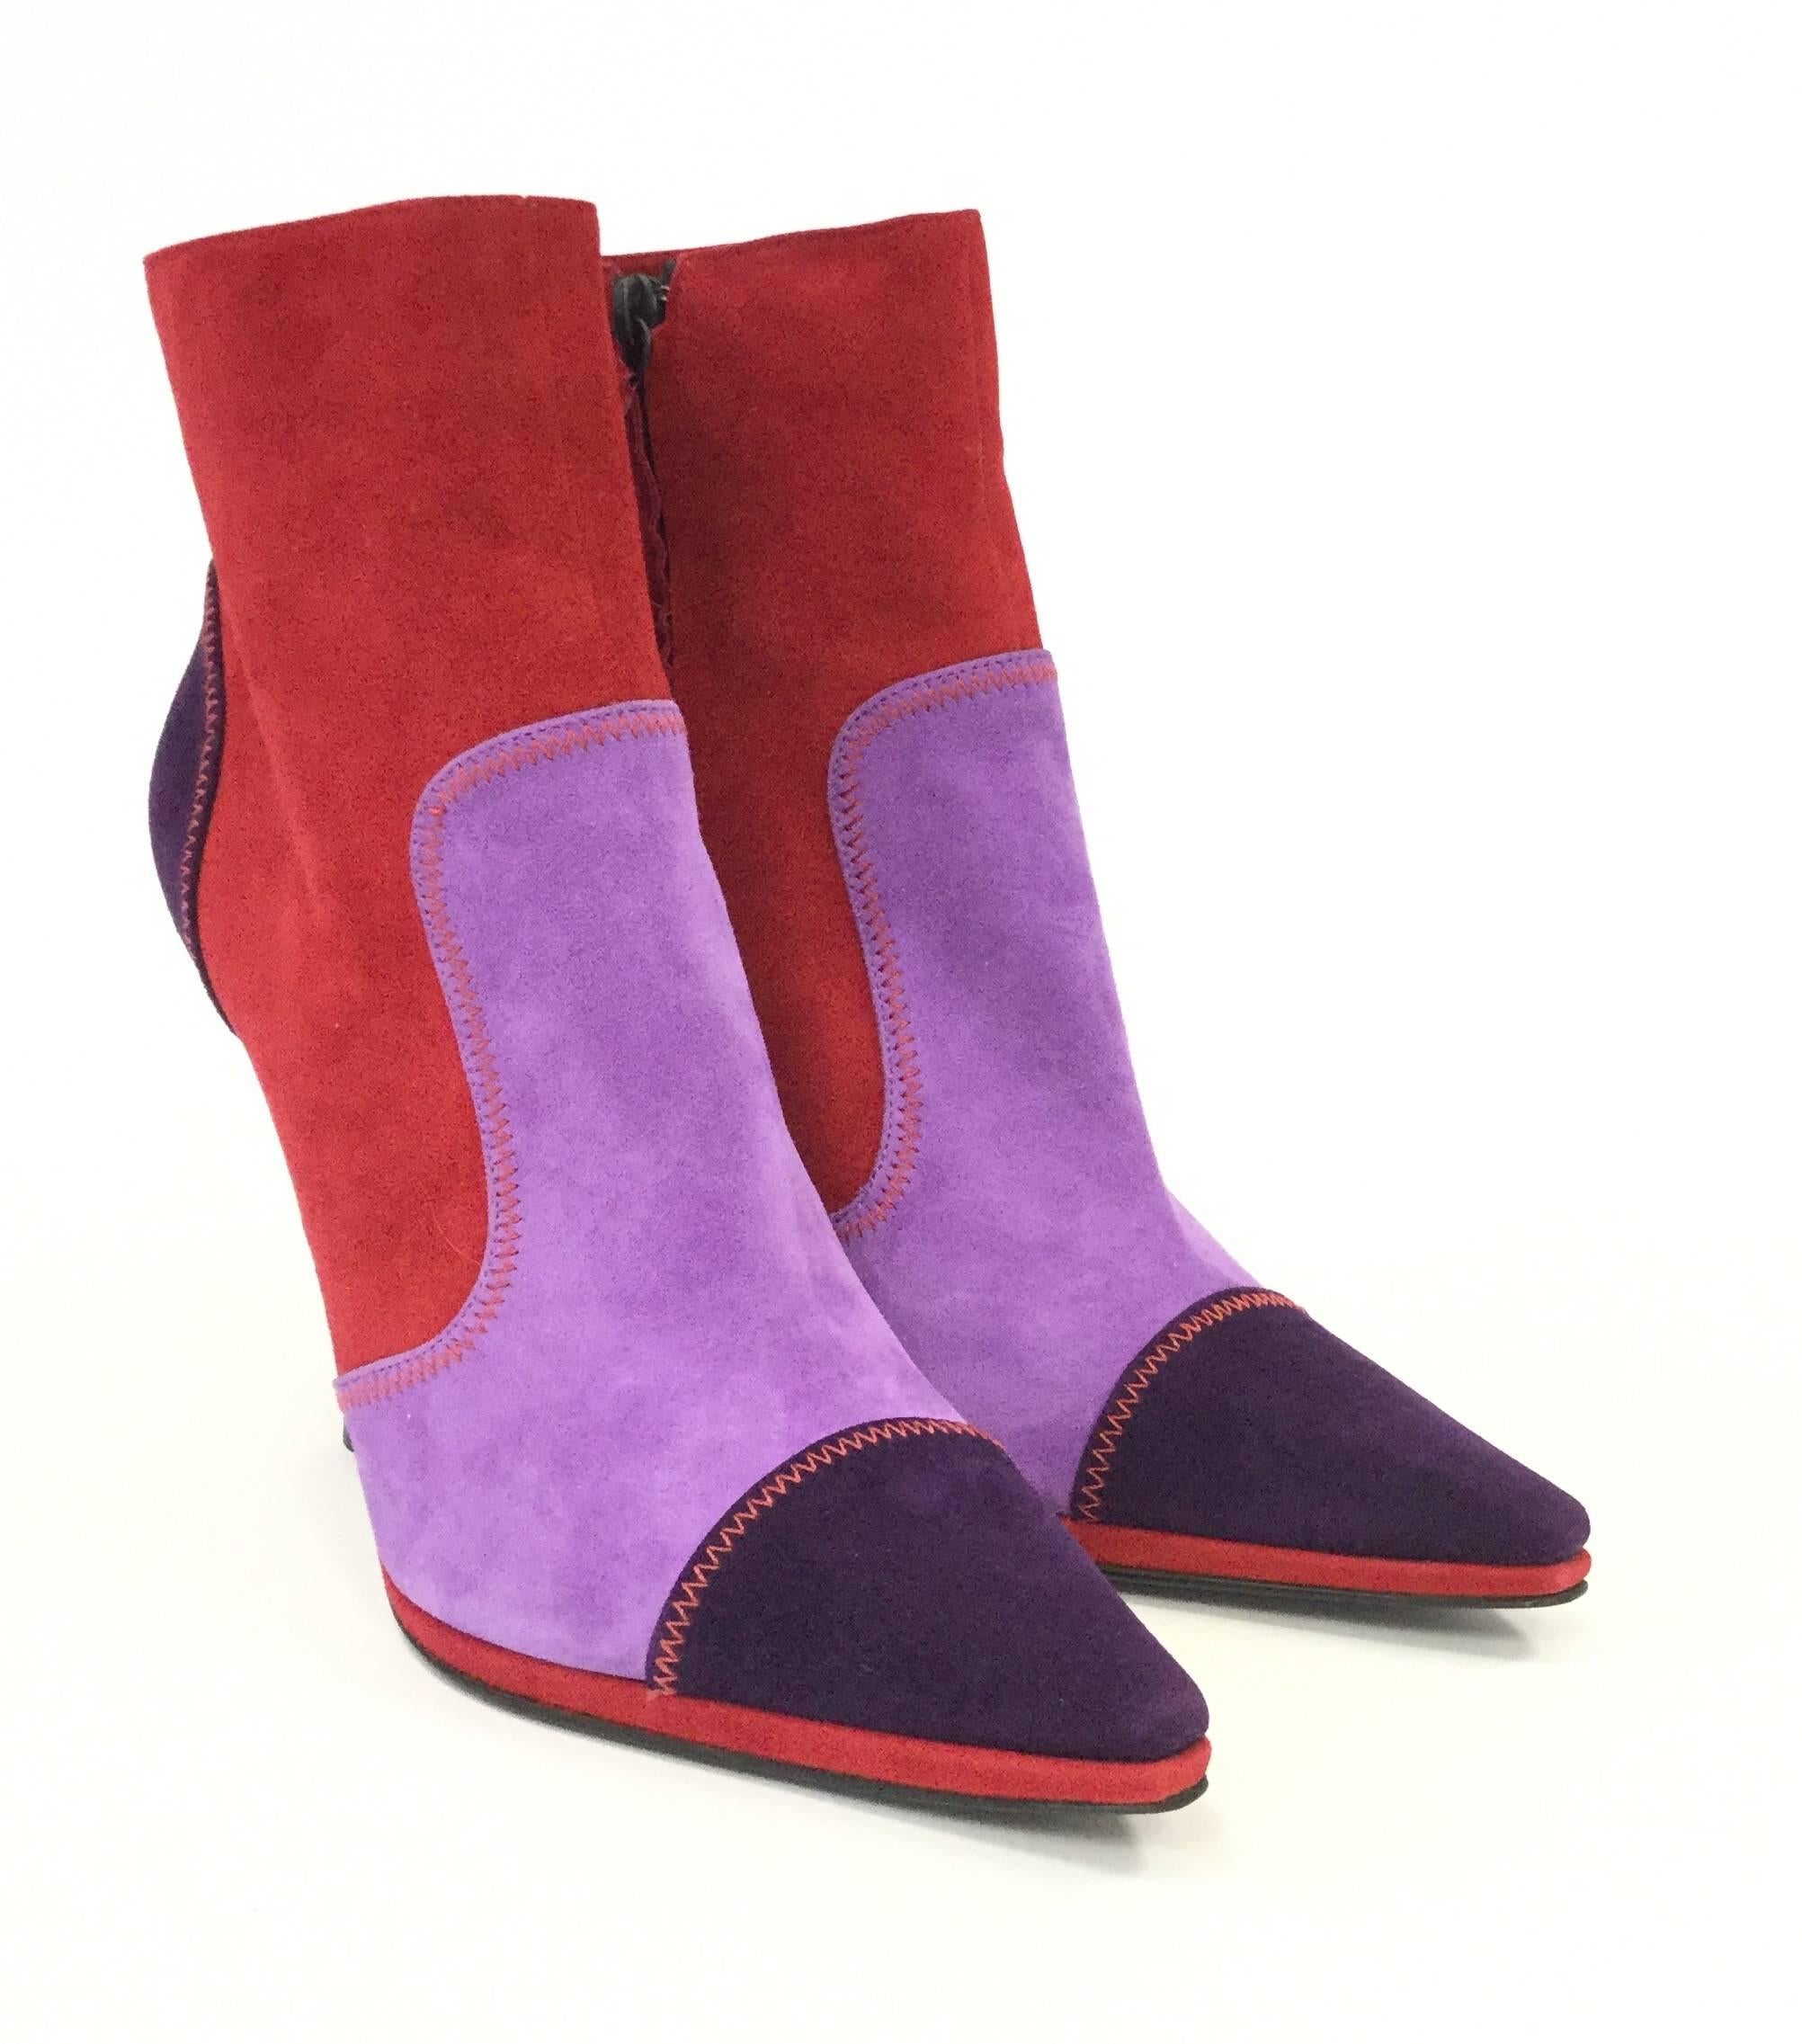 
New in box (NIB). Playful and sophisticated booties by Casadei. These suede booties are composed of multiple colorful panels of suede held together with red accent zigzag stitching. The shoes have deep purple toe and heel caps, violet vamps, and